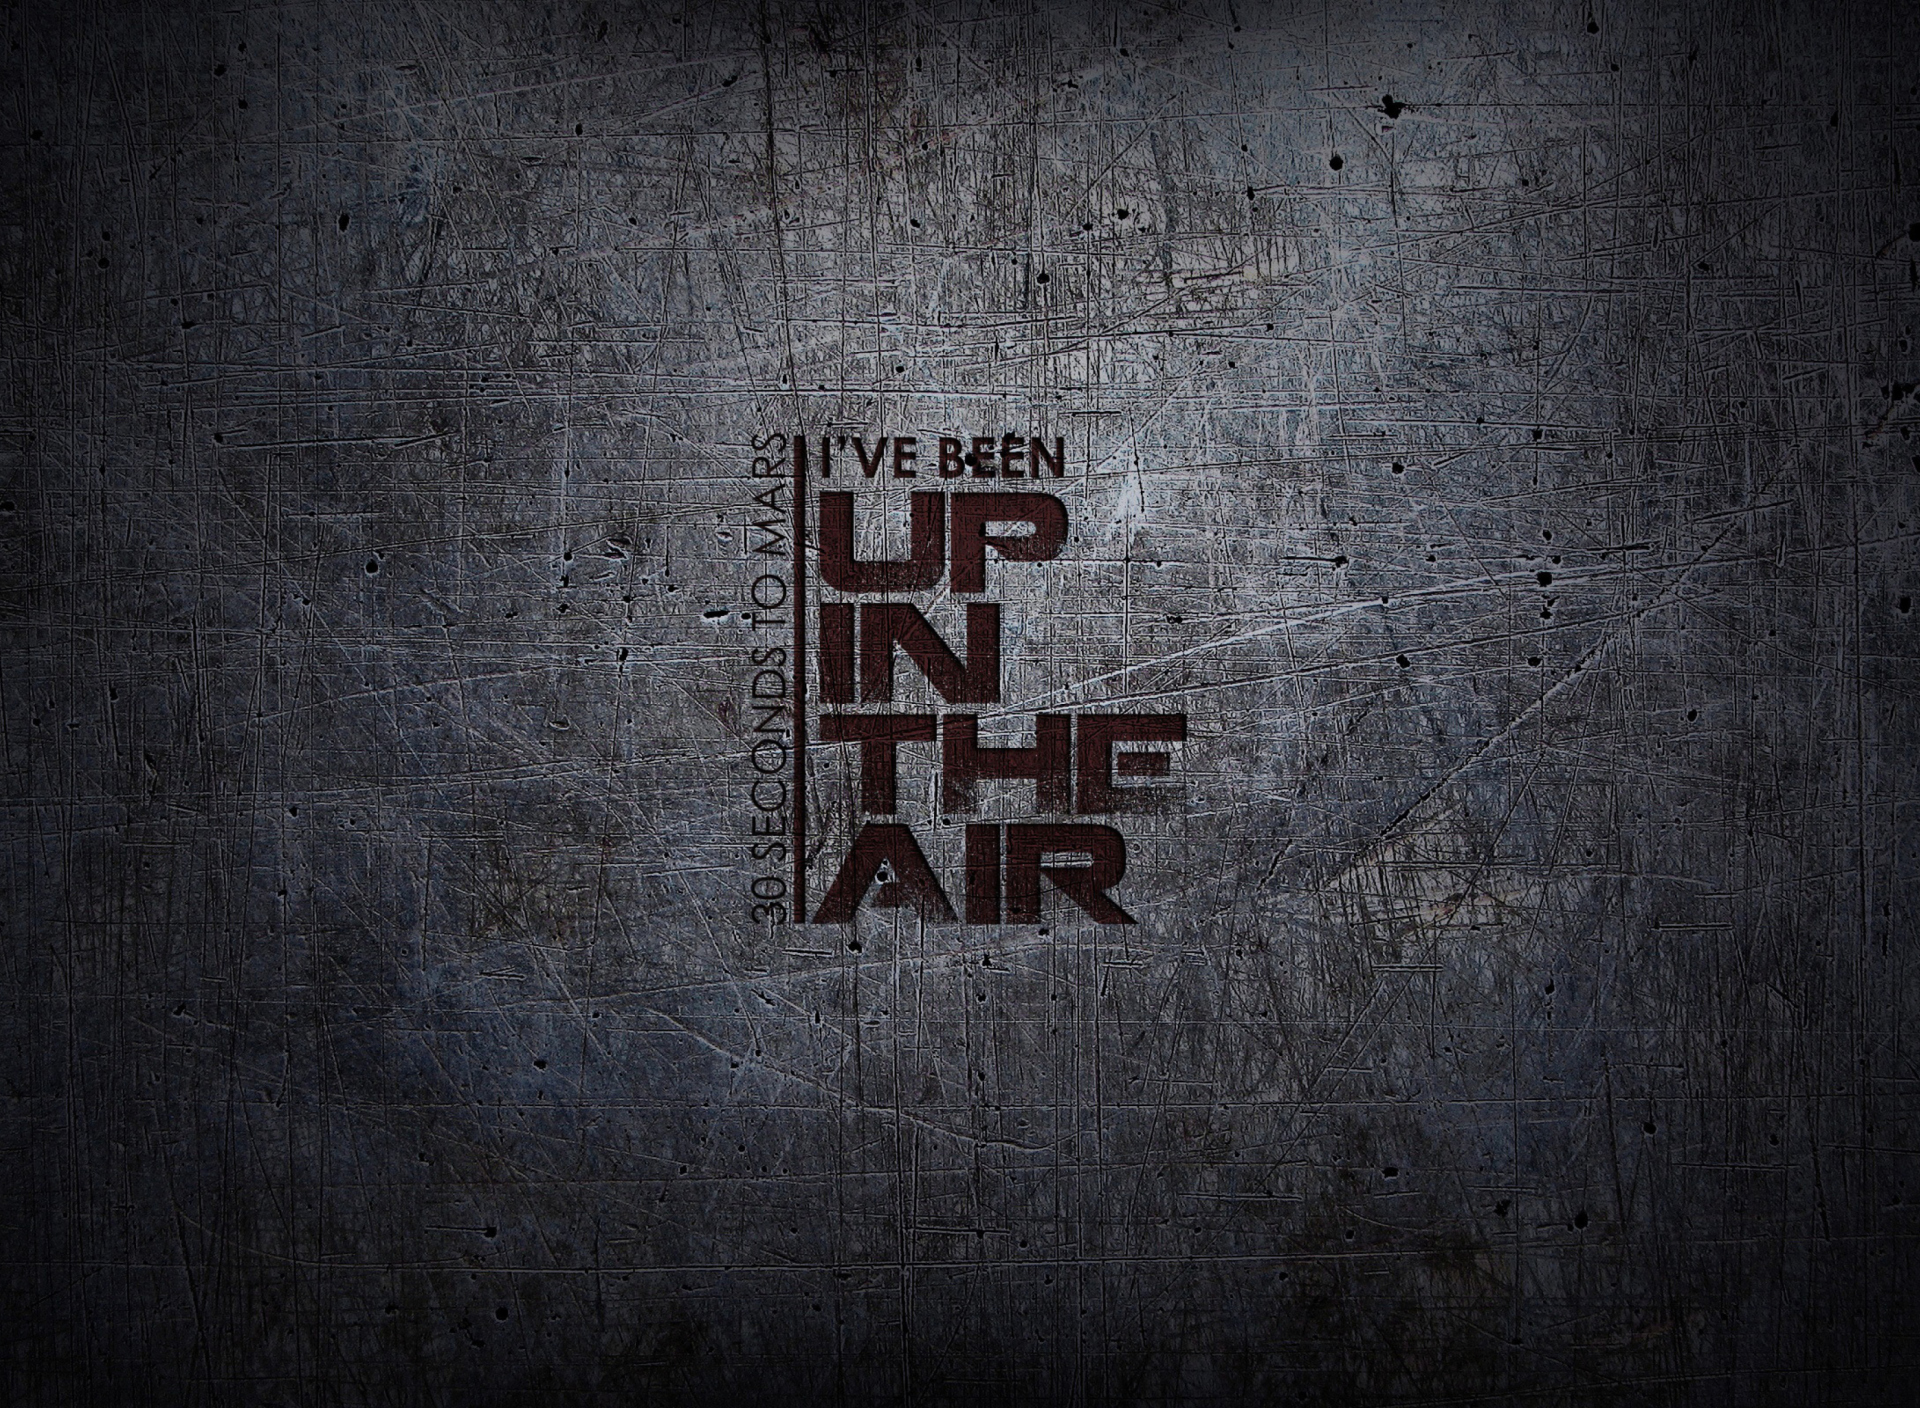 30 Seconds To Mars - Up In The Air wallpaper 1920x1408